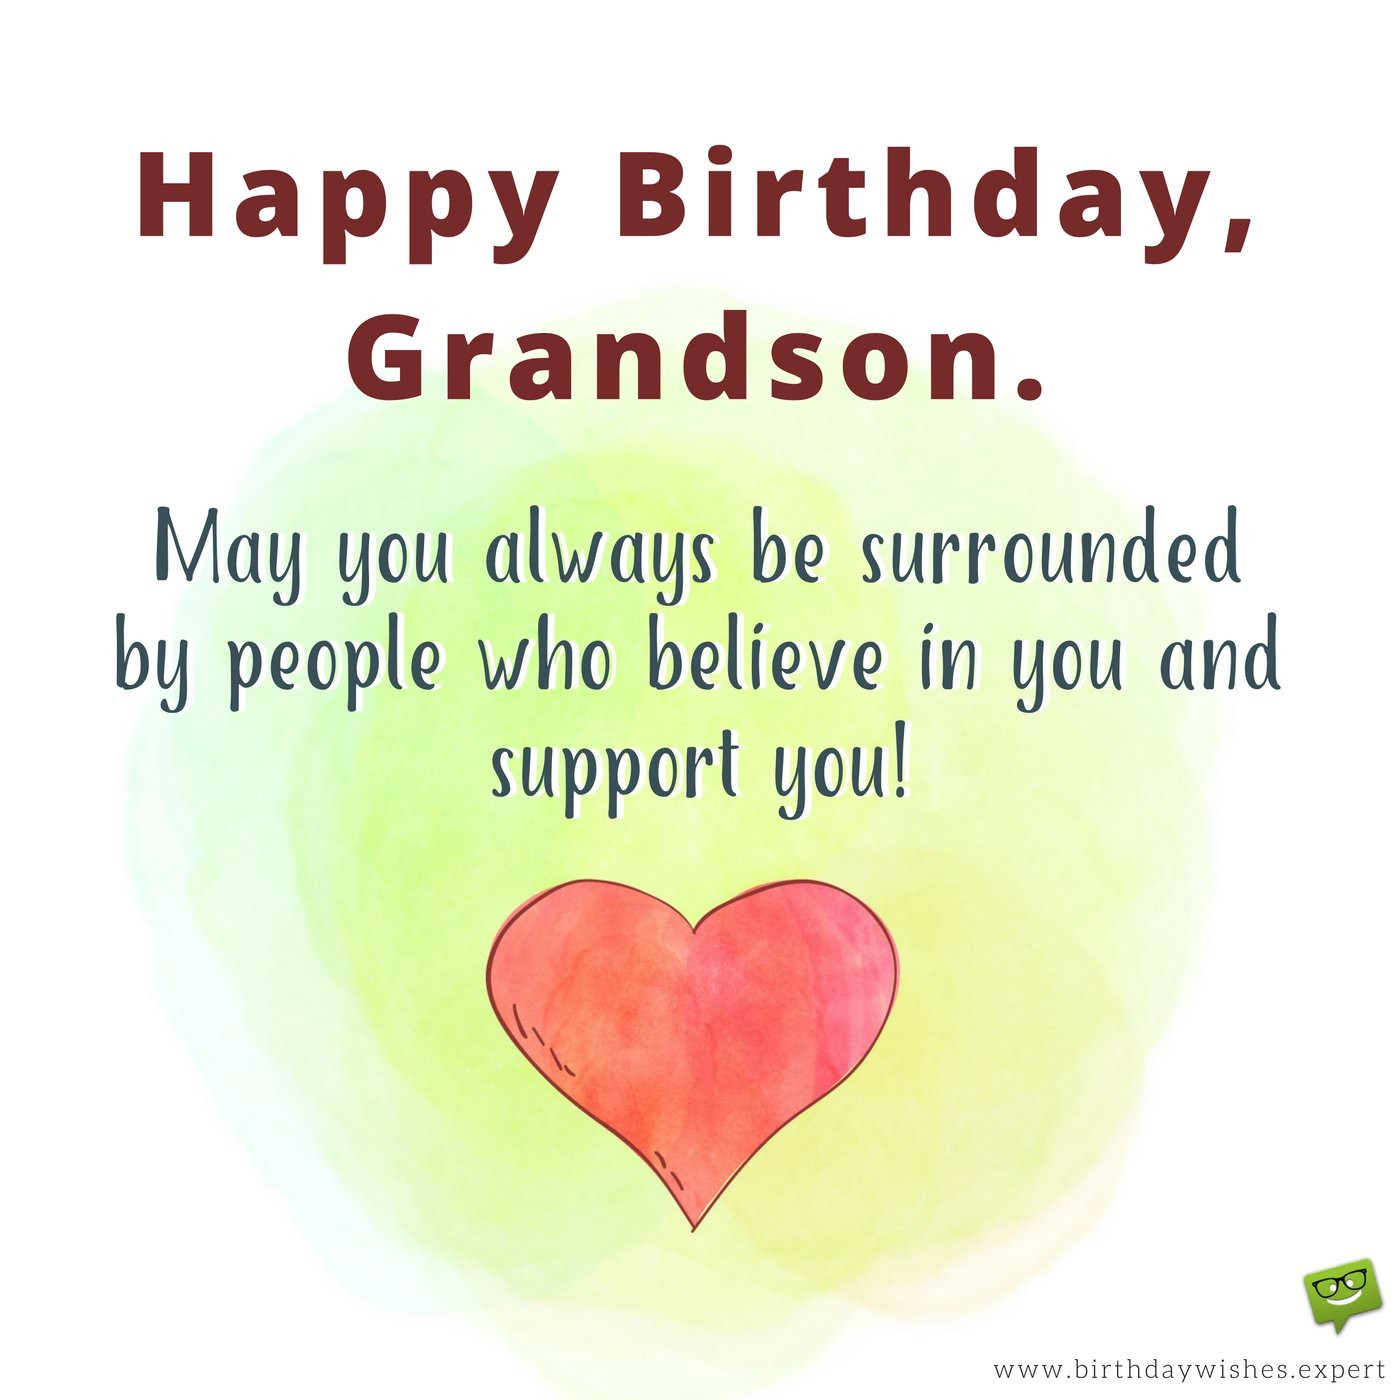 Grandson Birthday Quote
 From your Grandma & Grandpa Birthday Wishes for my Grandson